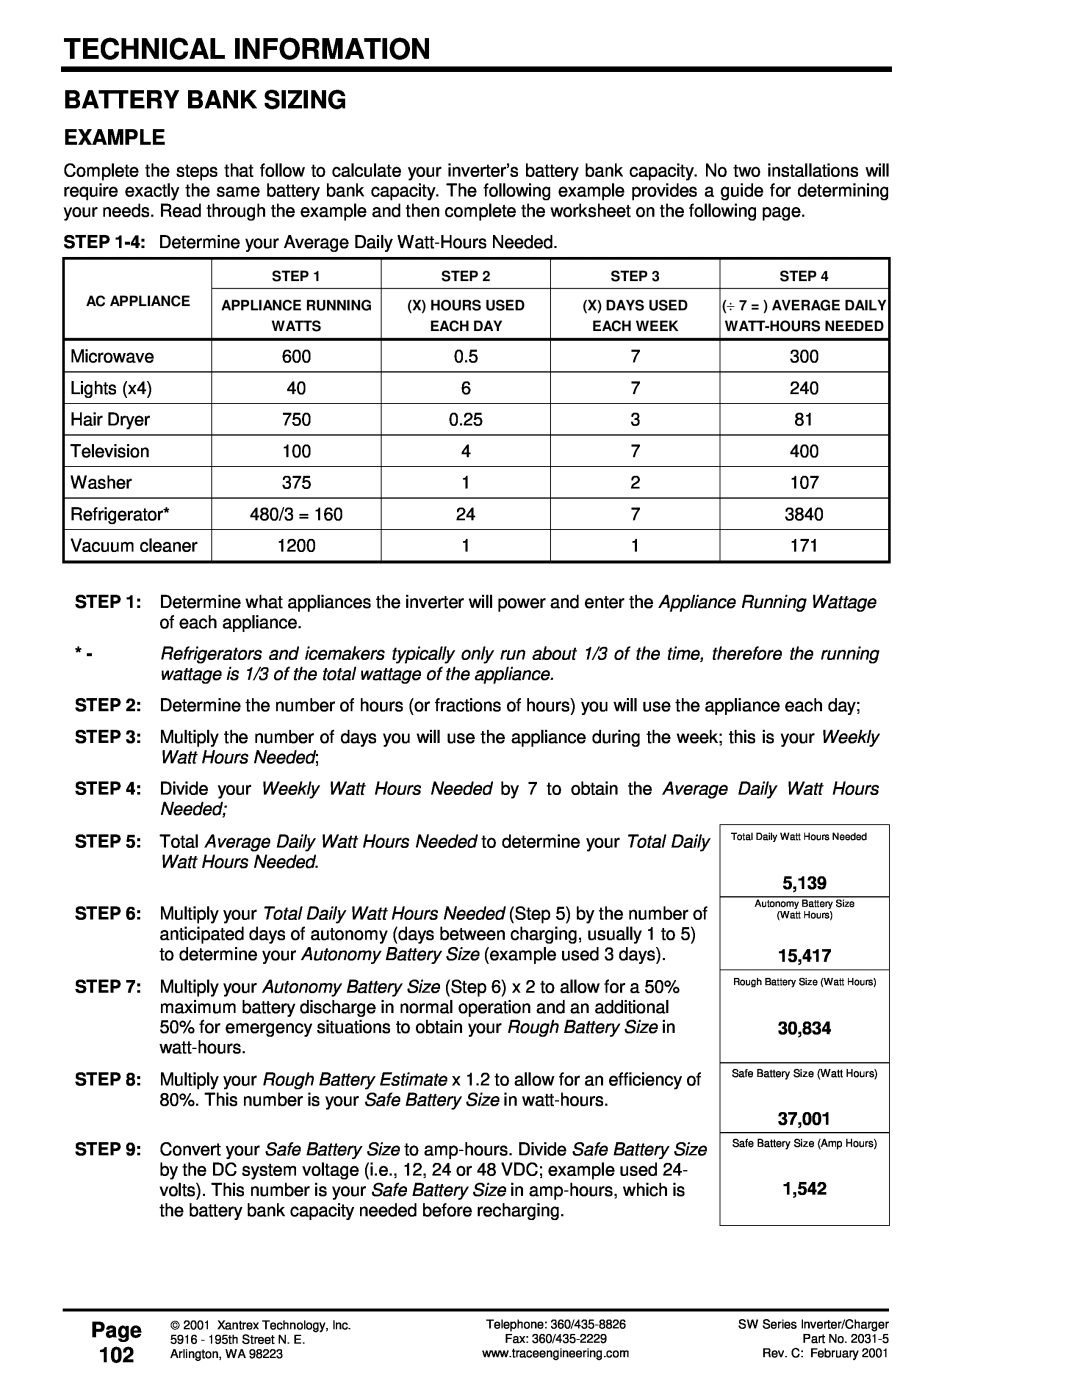 Xantrex Technology 120 VAC/60 owner manual Battery Bank Sizing, Example, Page, 5,139, 15,417, 30,834, 37,001, 1,542 